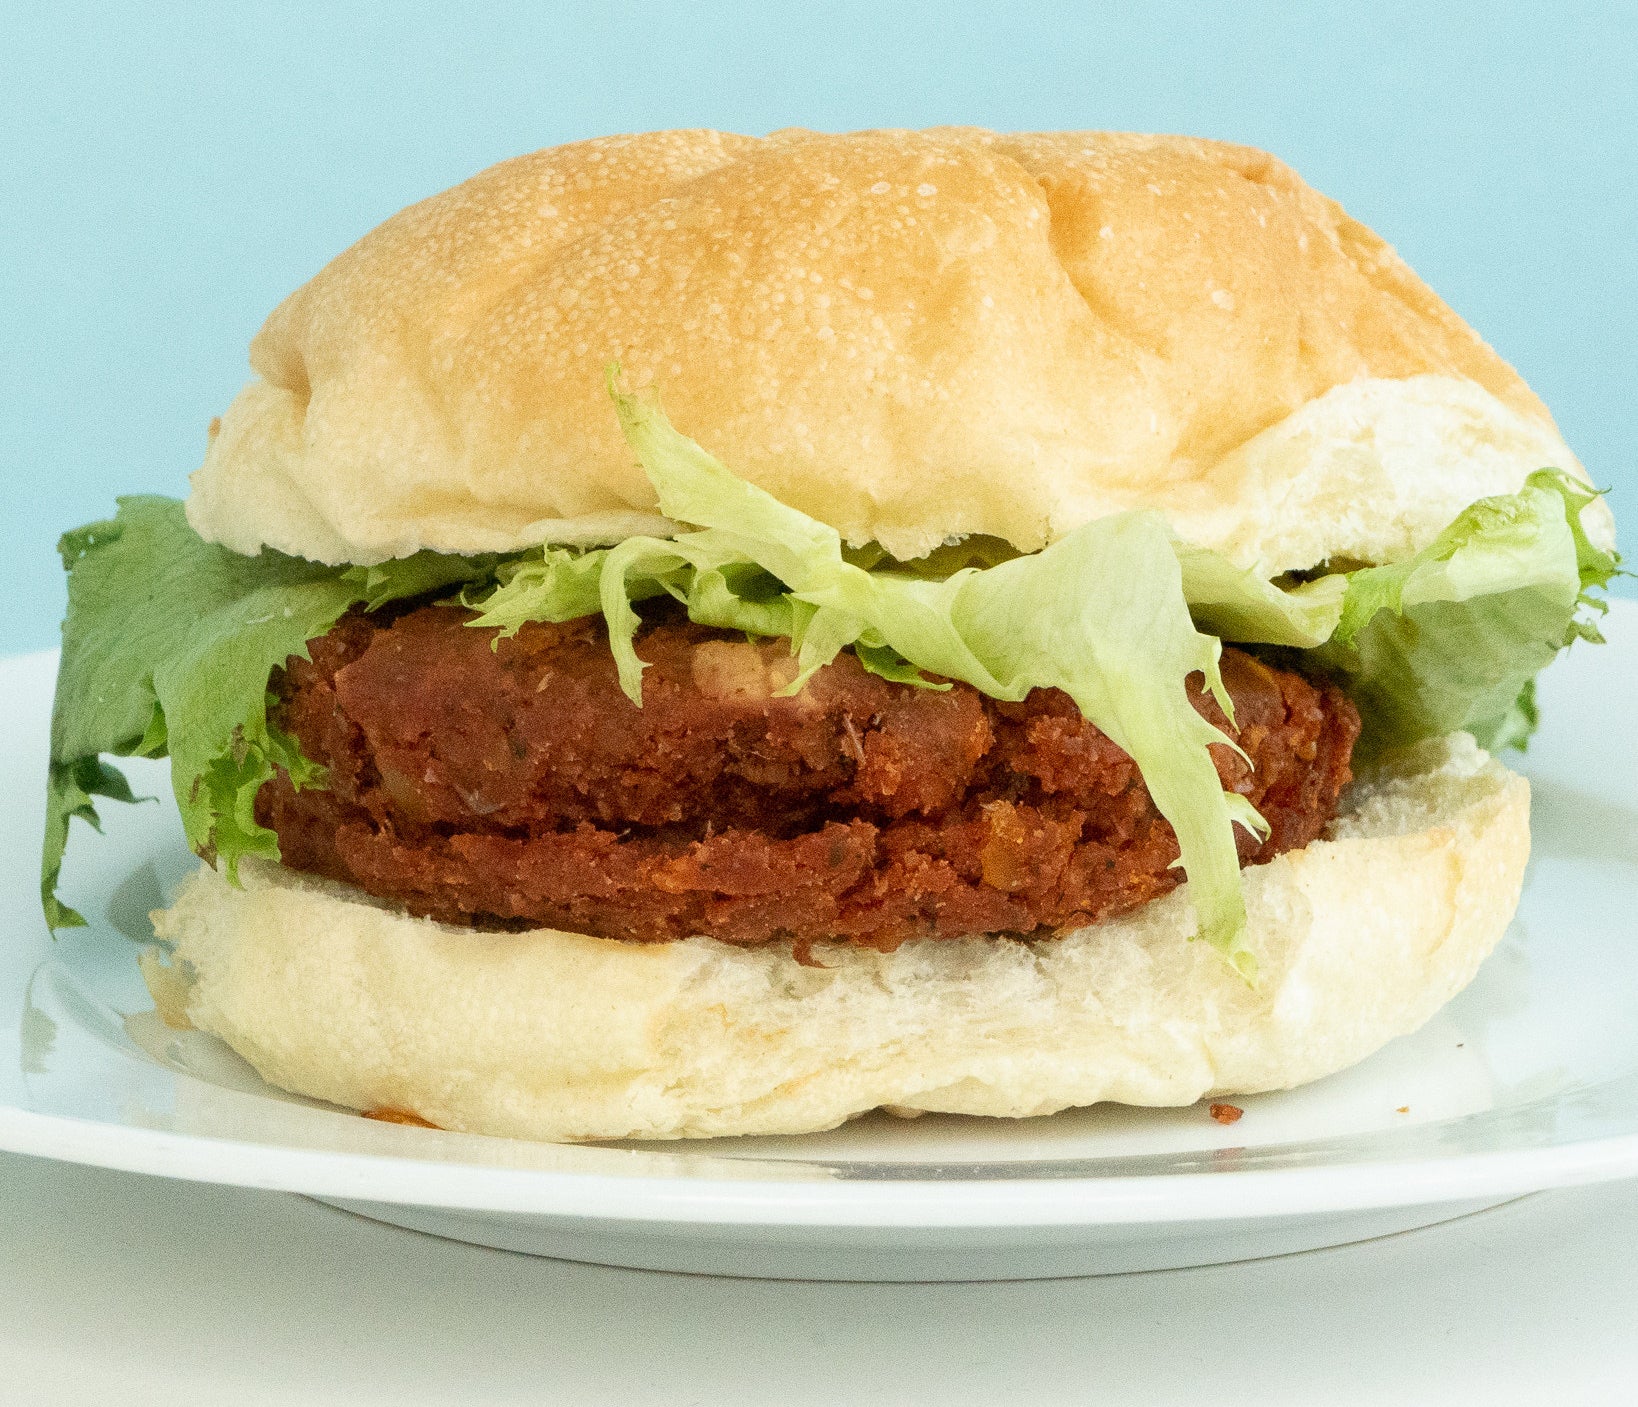 a burger with a reddish patty with lentils and corn visibly exposed